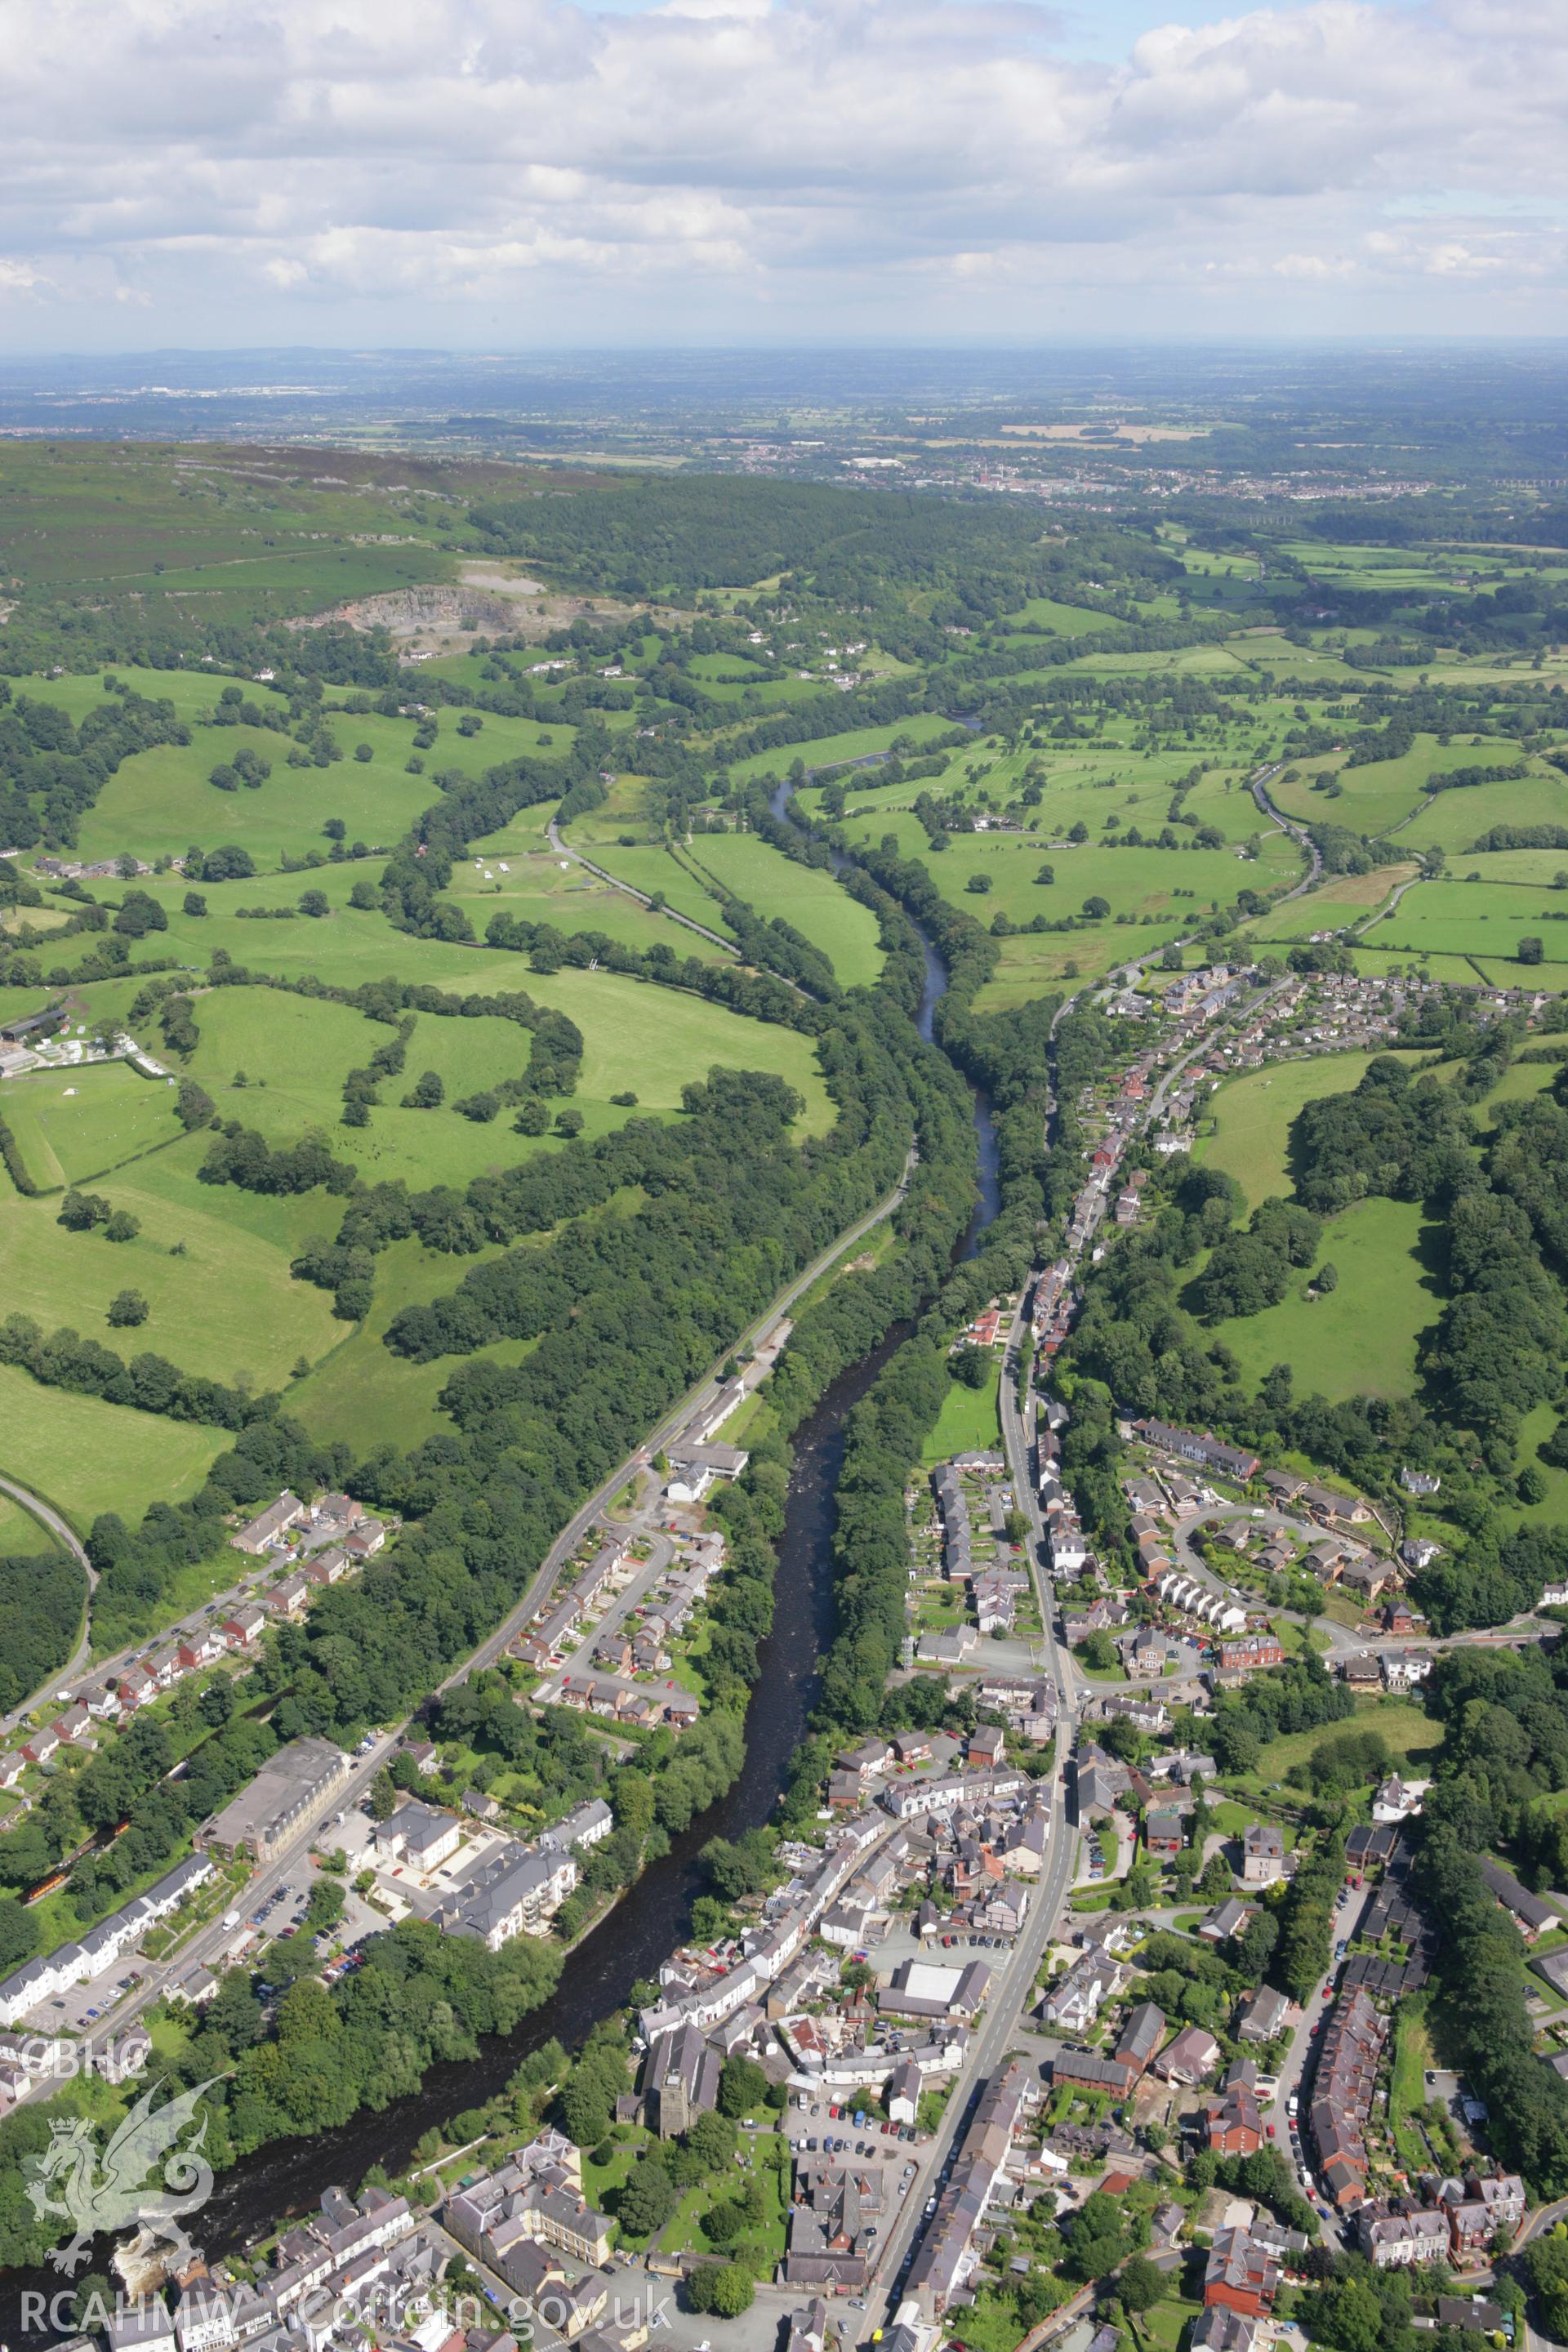 RCAHMW colour oblique aerial photograph of Llangollen. Taken on 24 July 2007 by Toby Driver